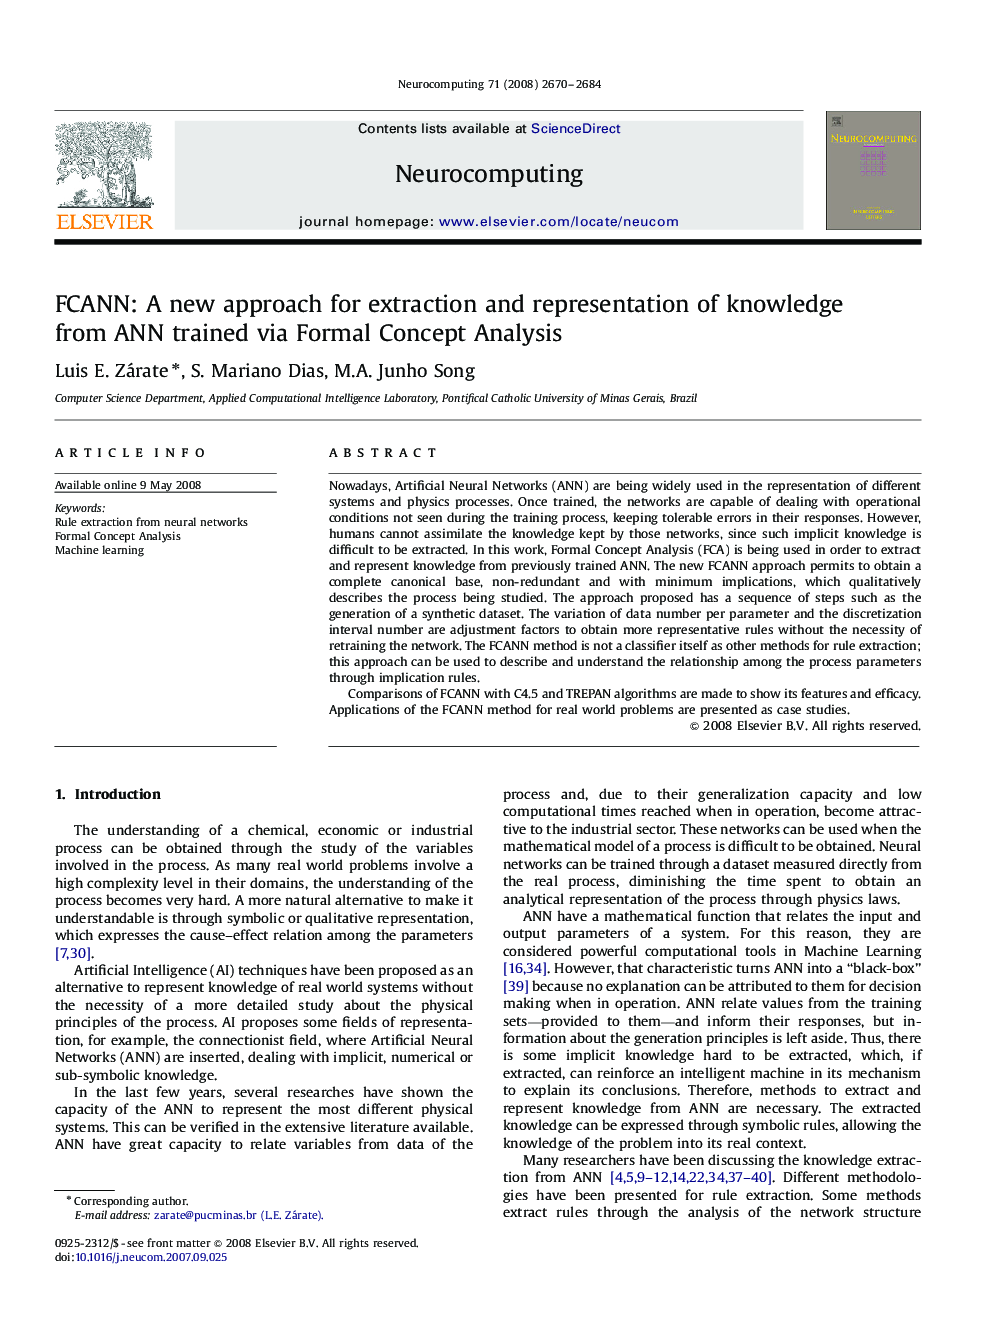 FCANN: A new approach for extraction and representation of knowledge from ANN trained via Formal Concept Analysis